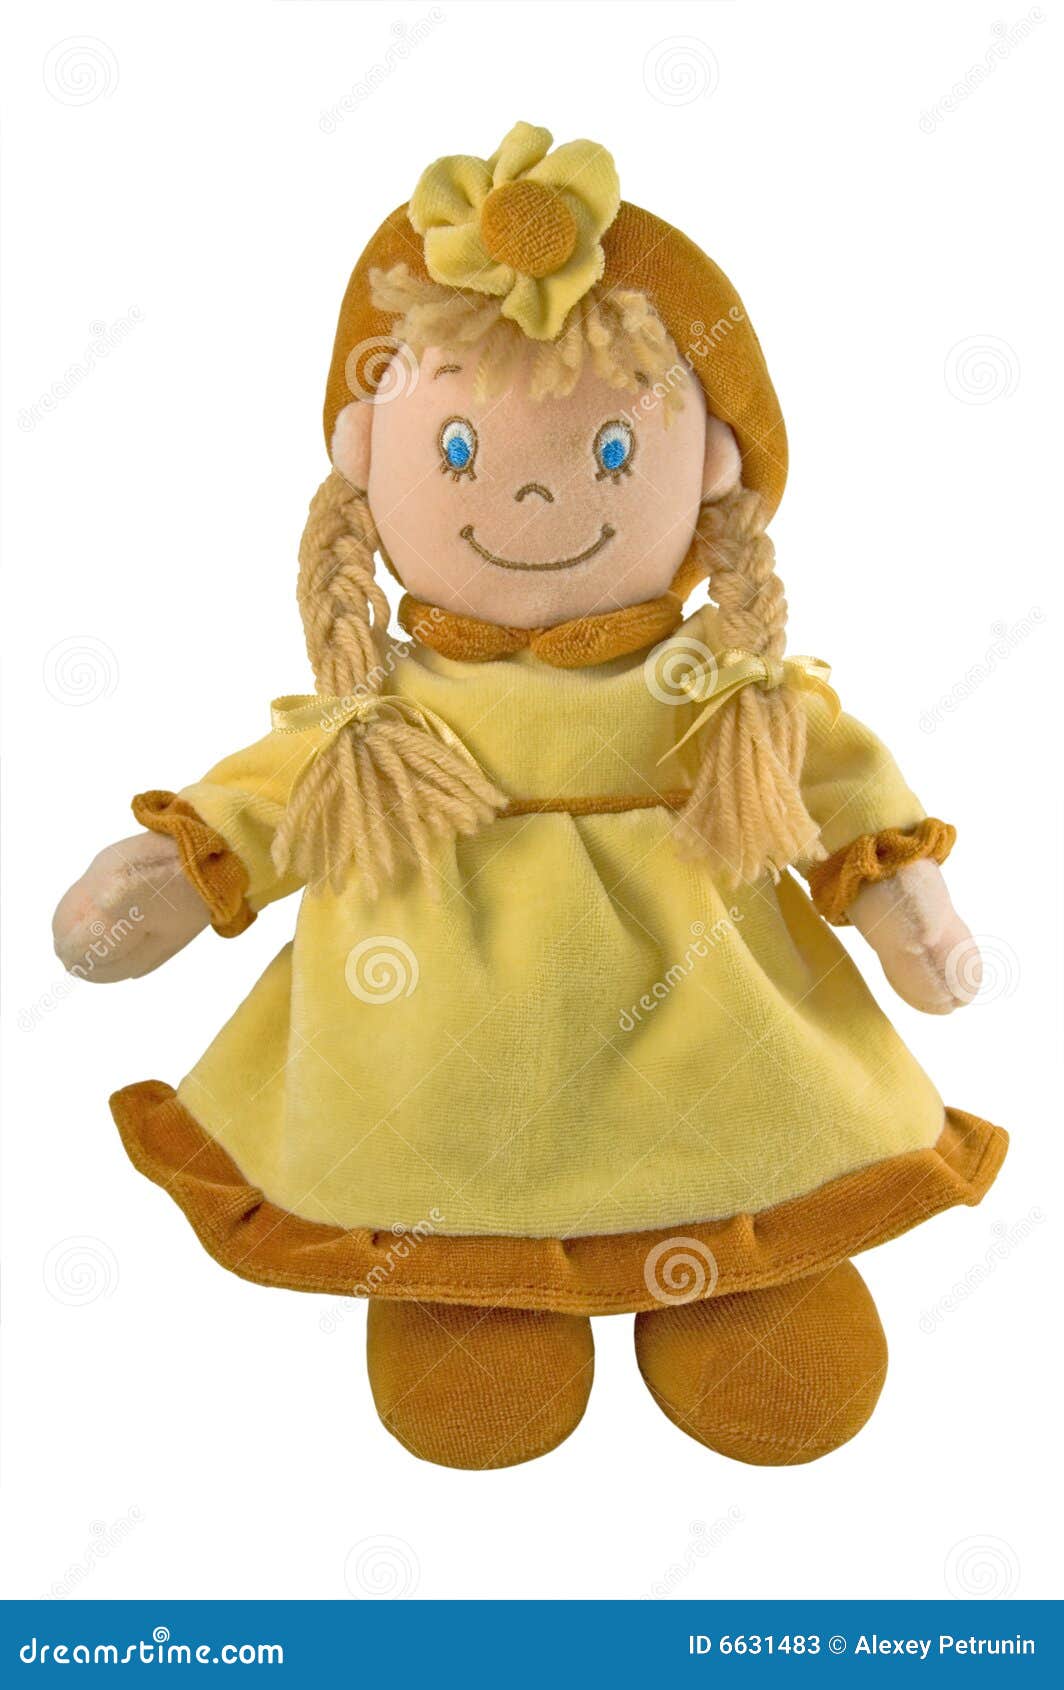 Rag Doll, Fabric Doll. Colorfull puppet doll isolated in white background